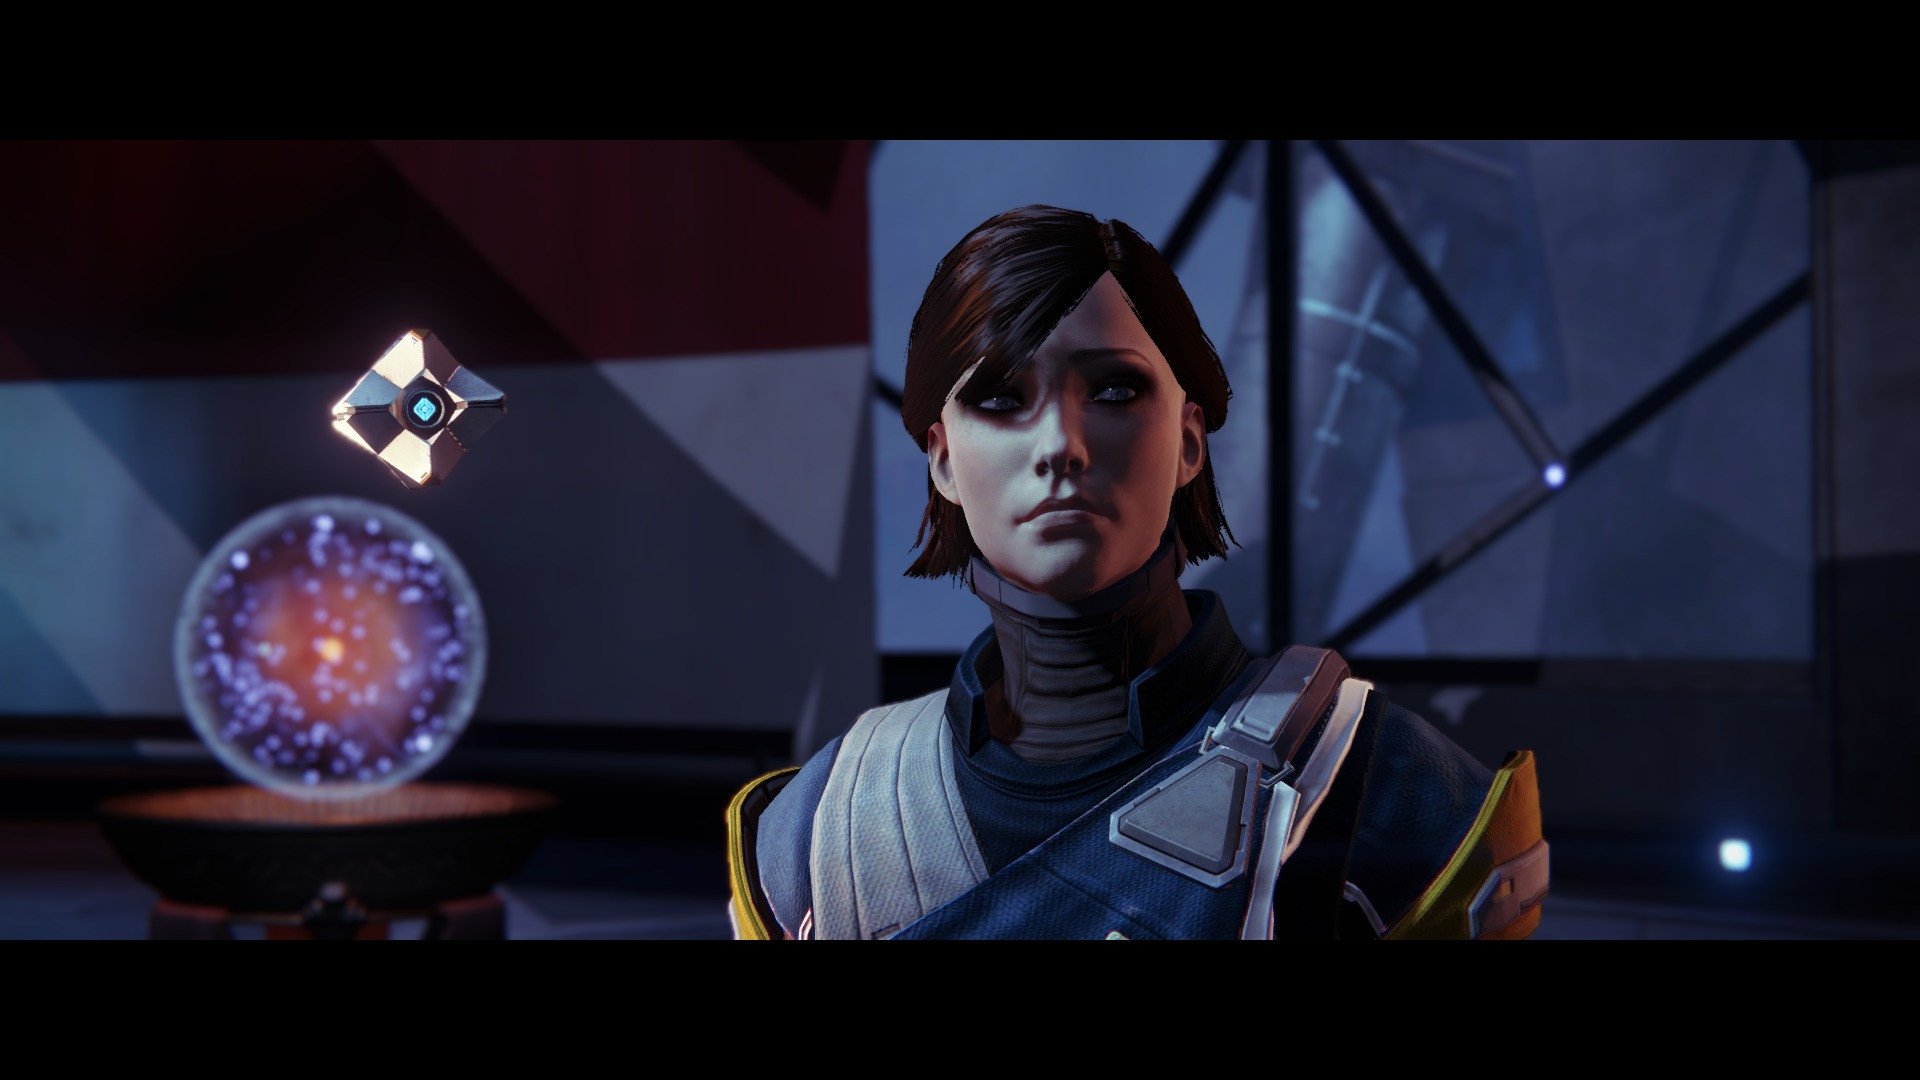 Destiny 2 Female Hairstyles
 What does your Destiny character look like